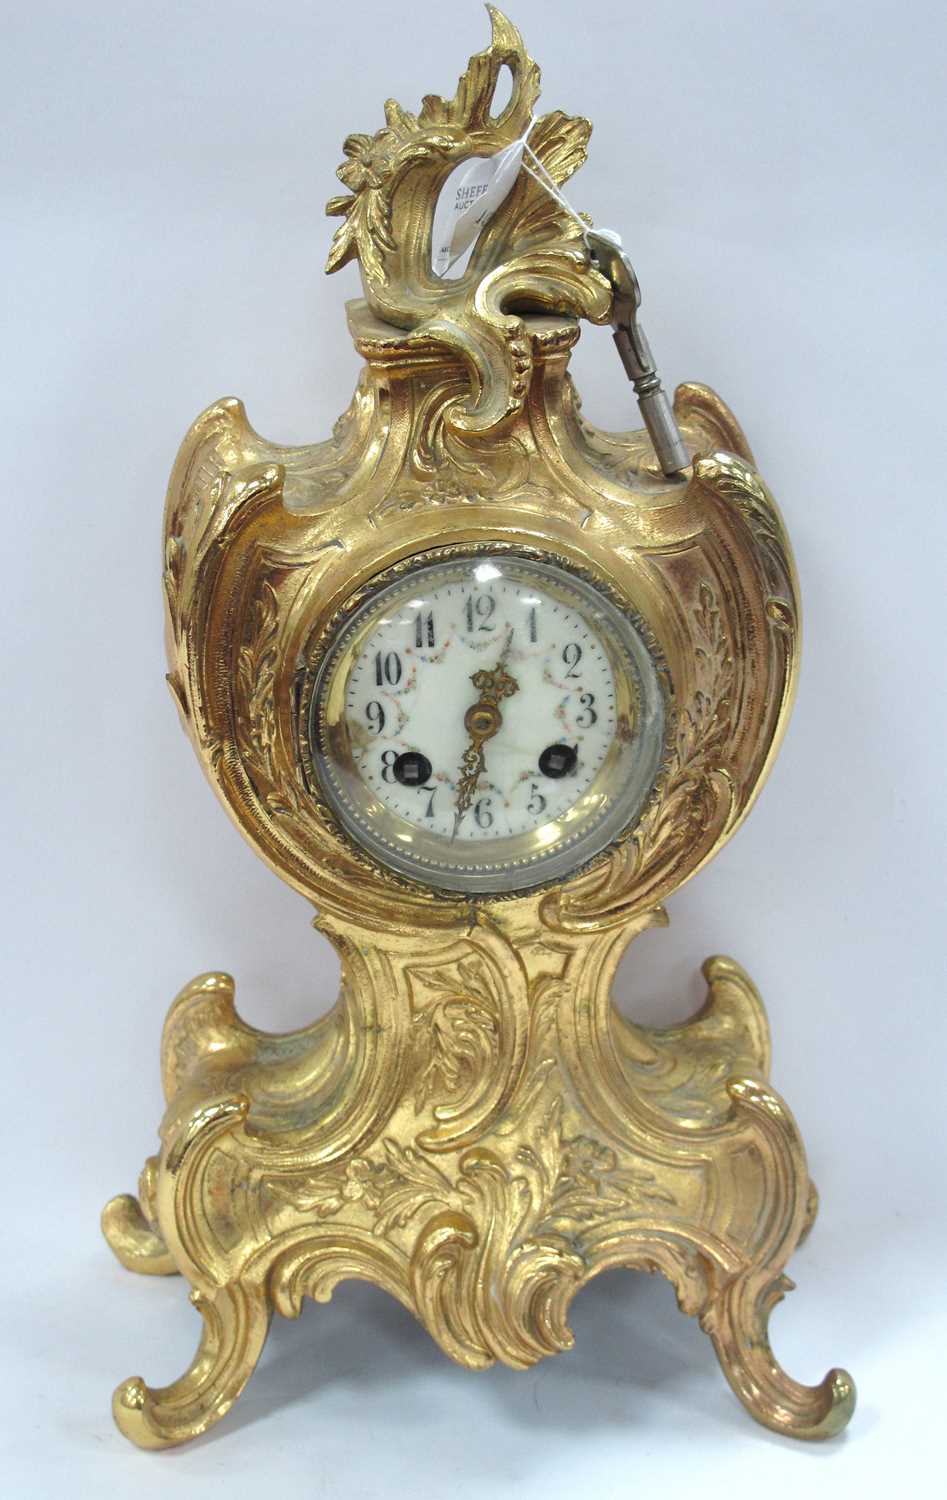 A Late XIX Century French Mantle Clock, the ornate ormolu case cast with scrollwork and flowers, the - Image 2 of 2